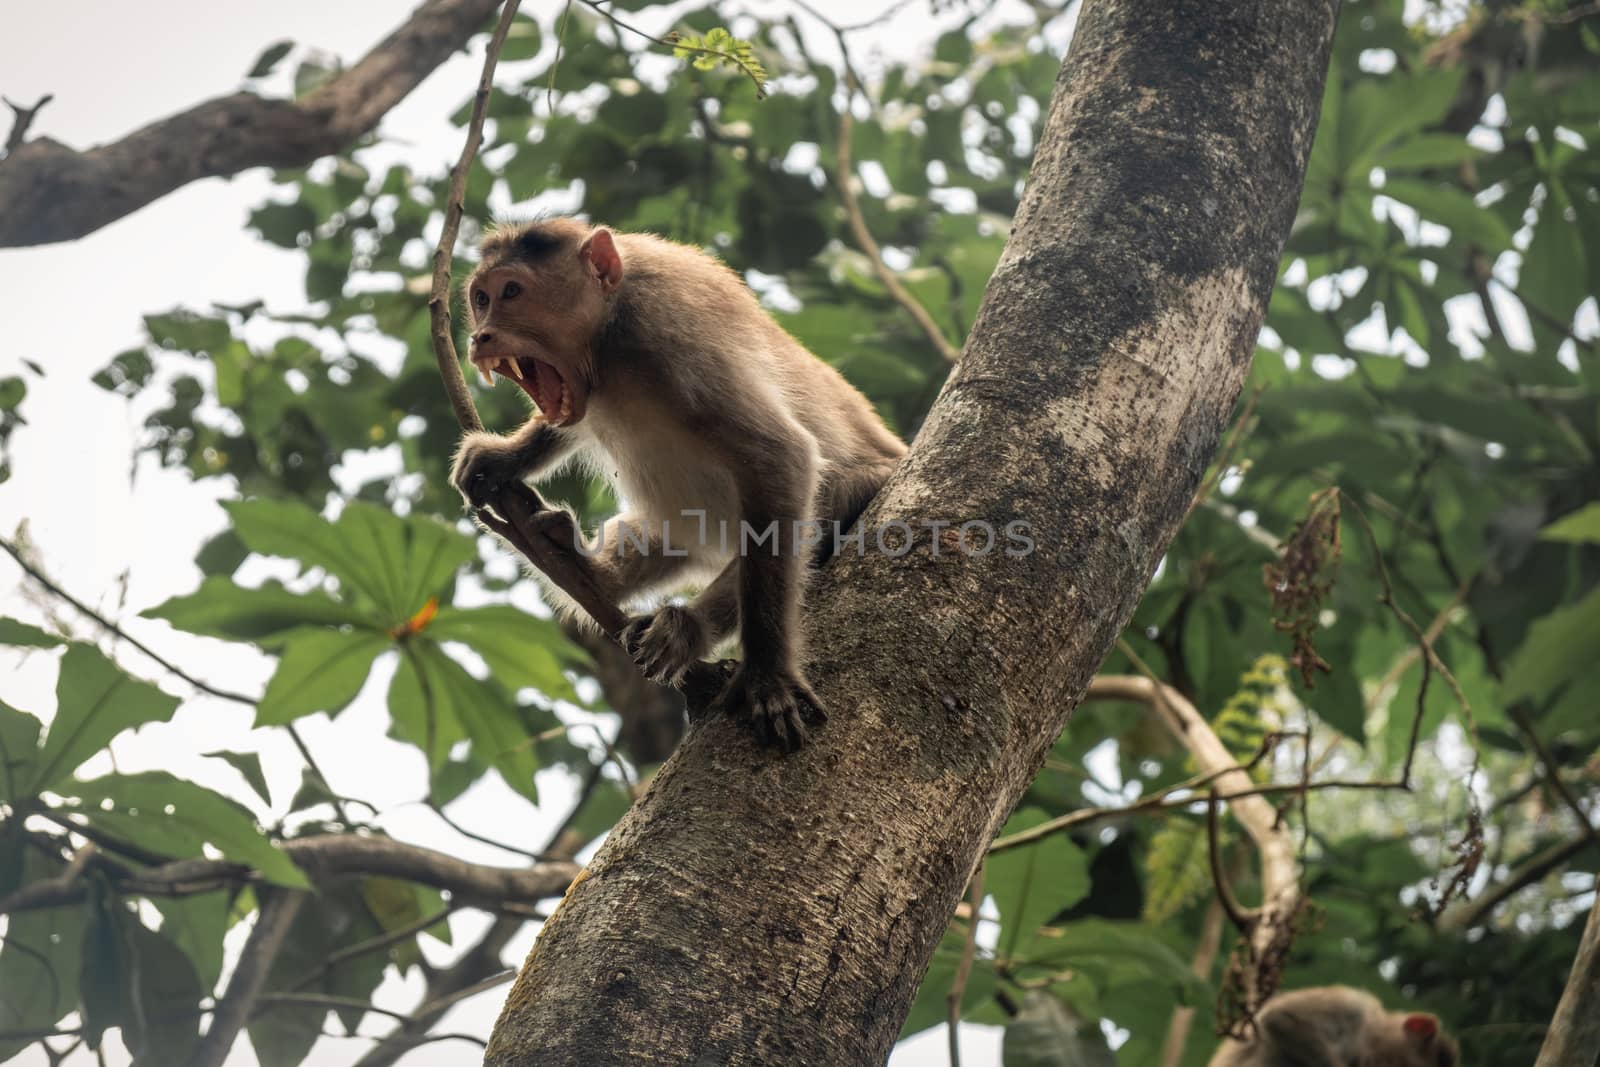 Monkey With Mouth Open On Tree by snep_photo